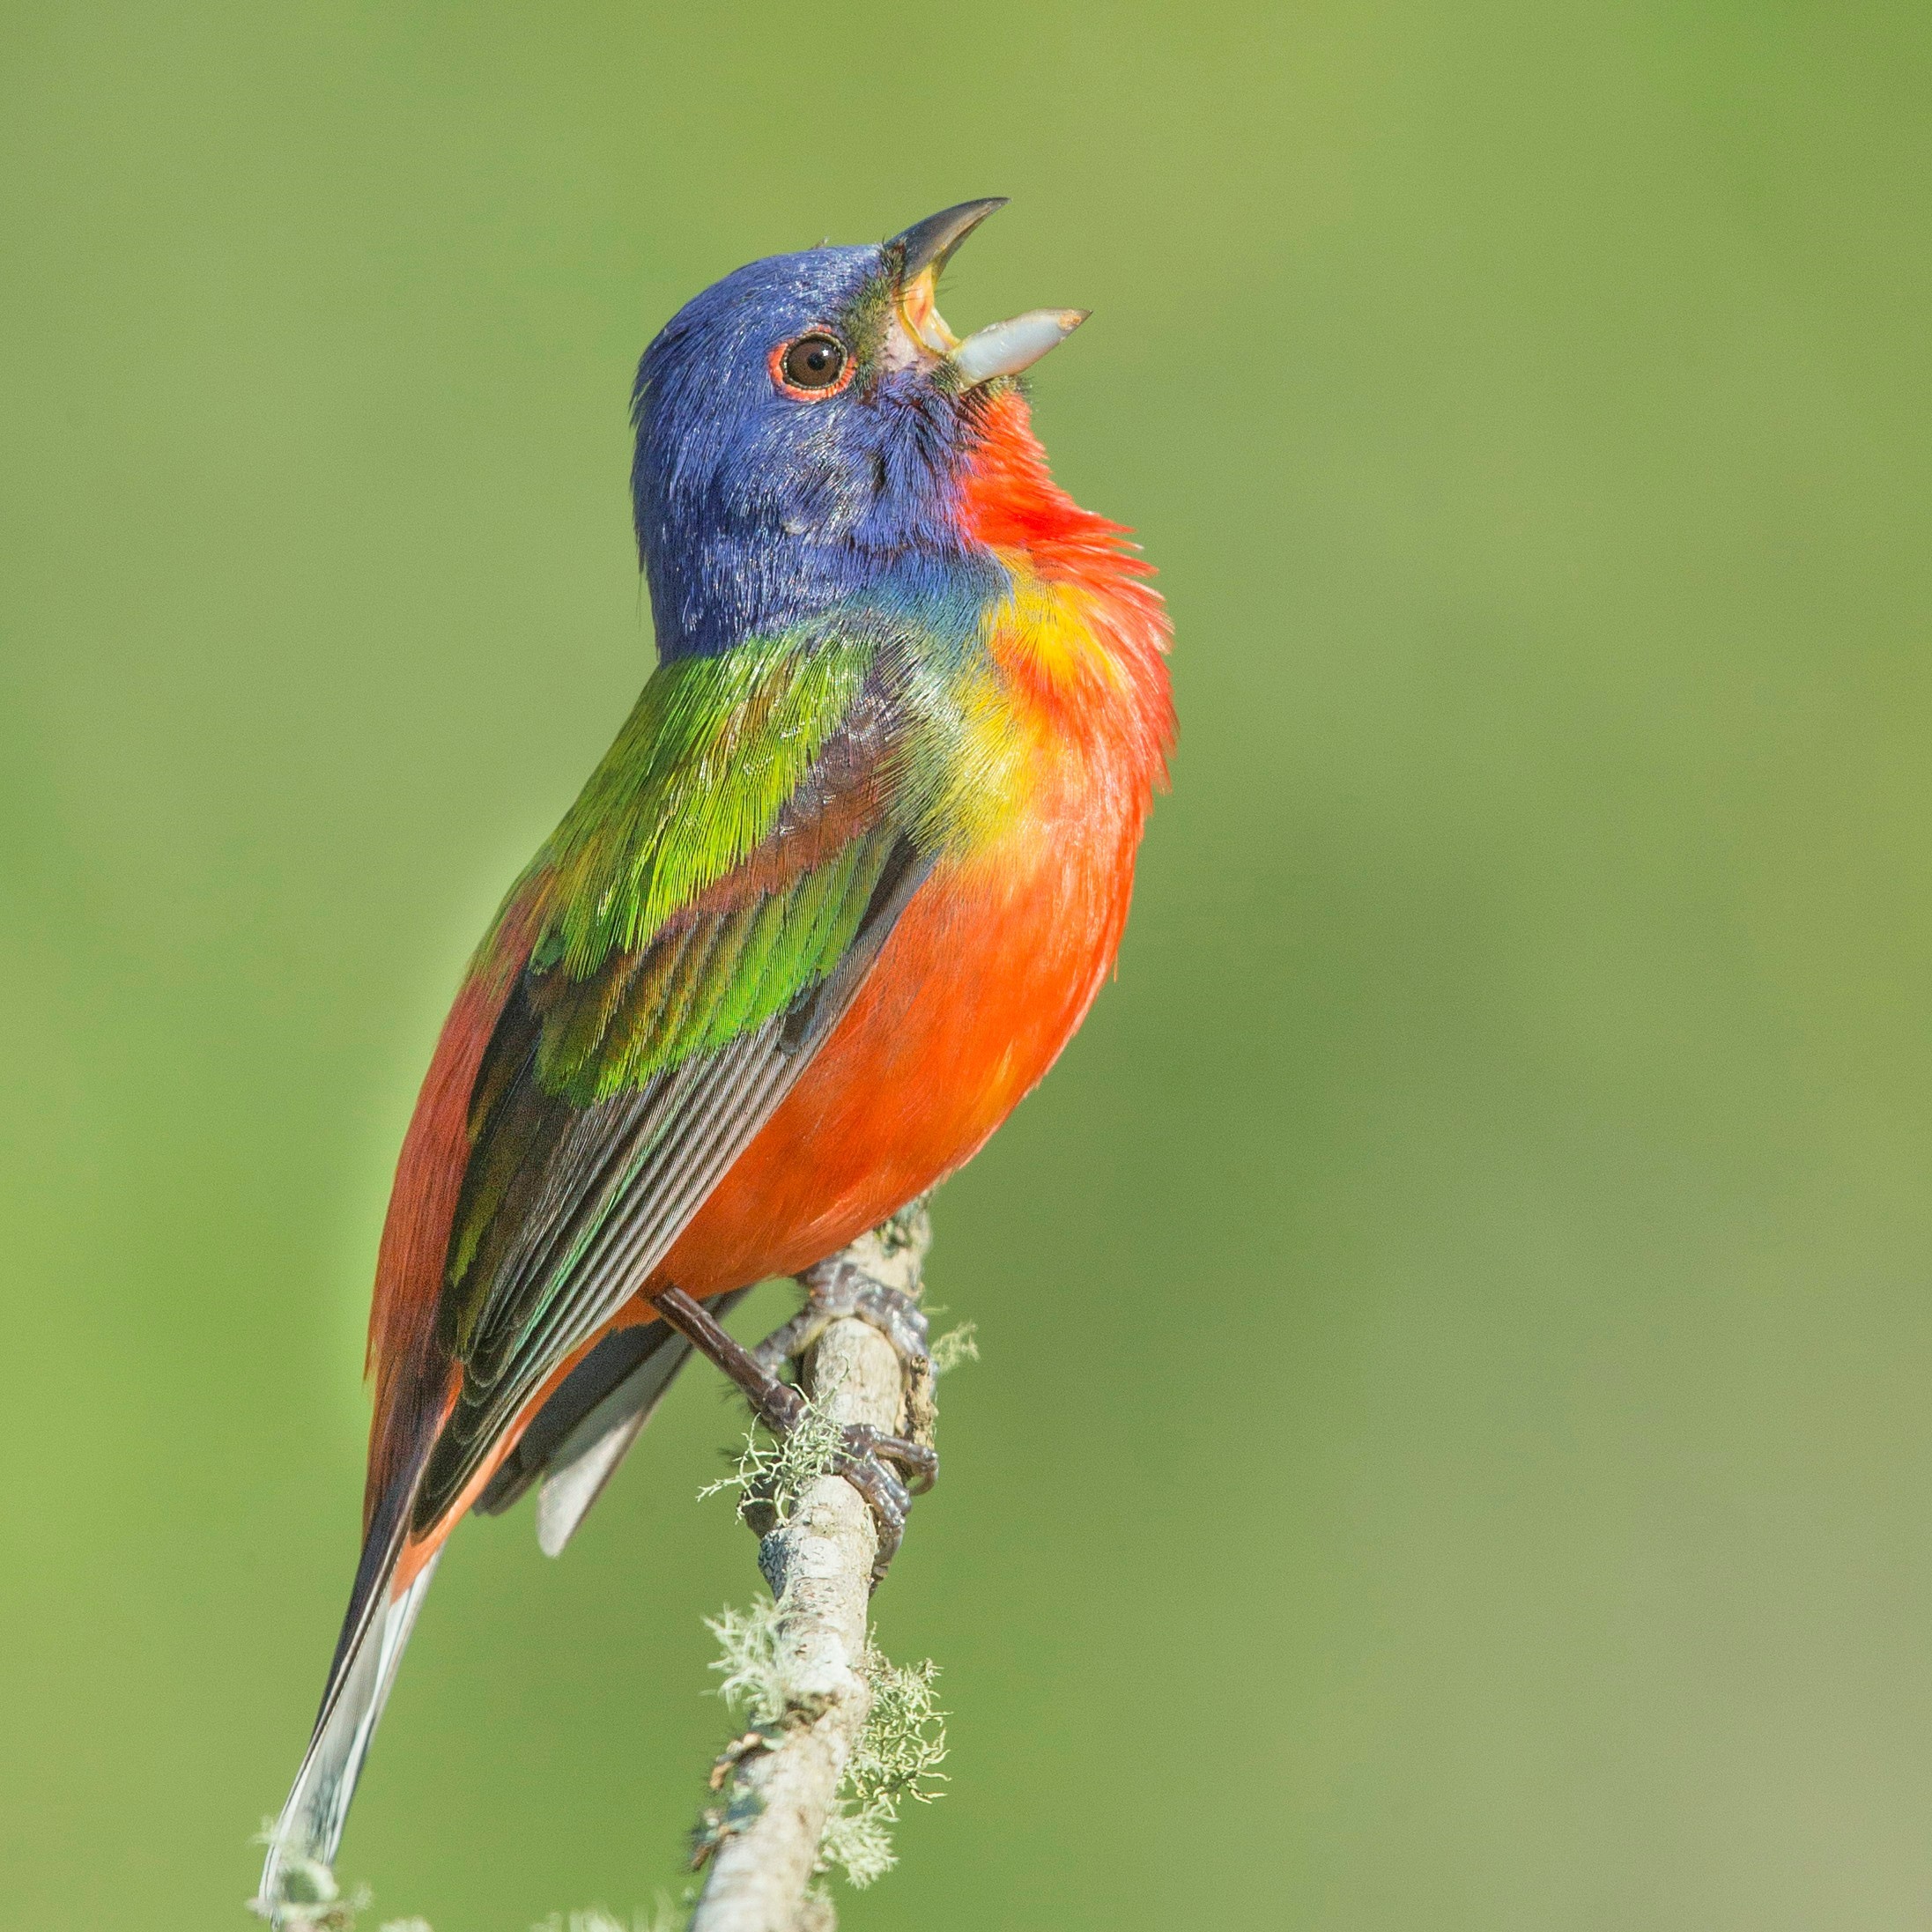 Painted Bunting sits perched on a branch.